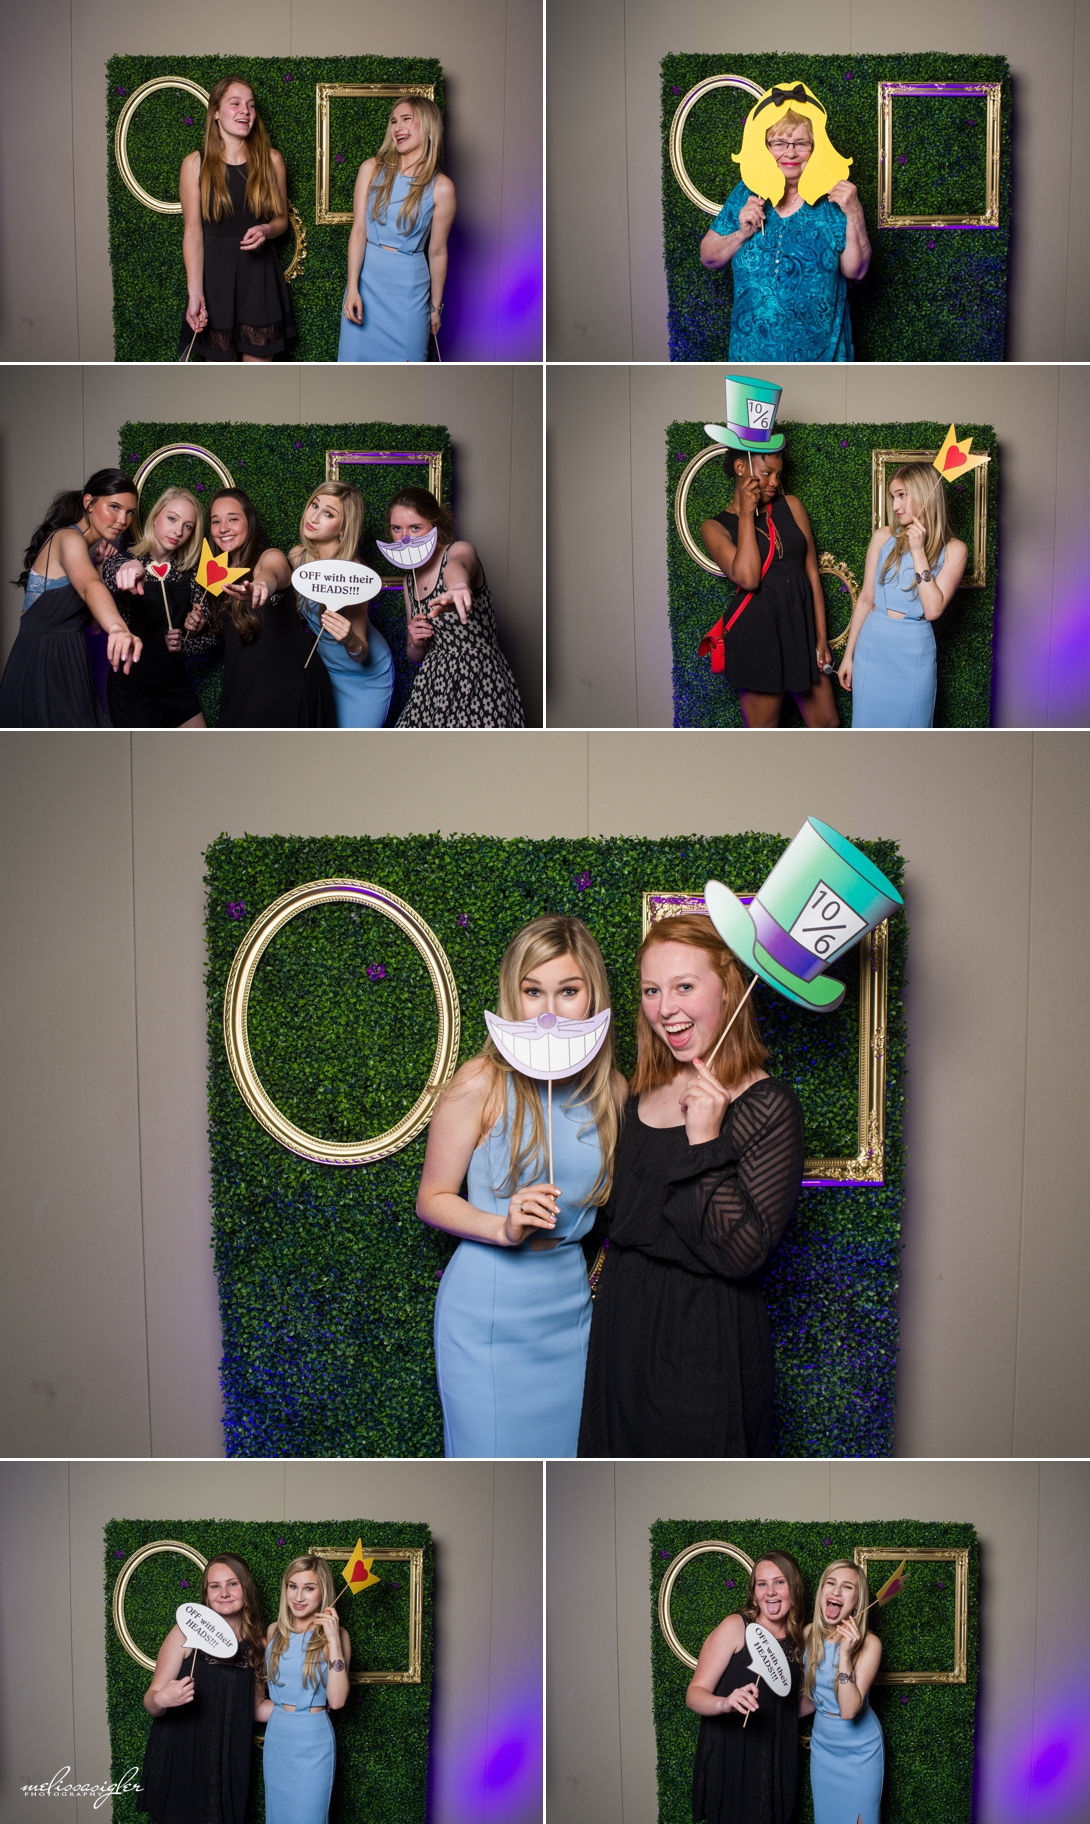 Alice in Wonderland theme photo booth props